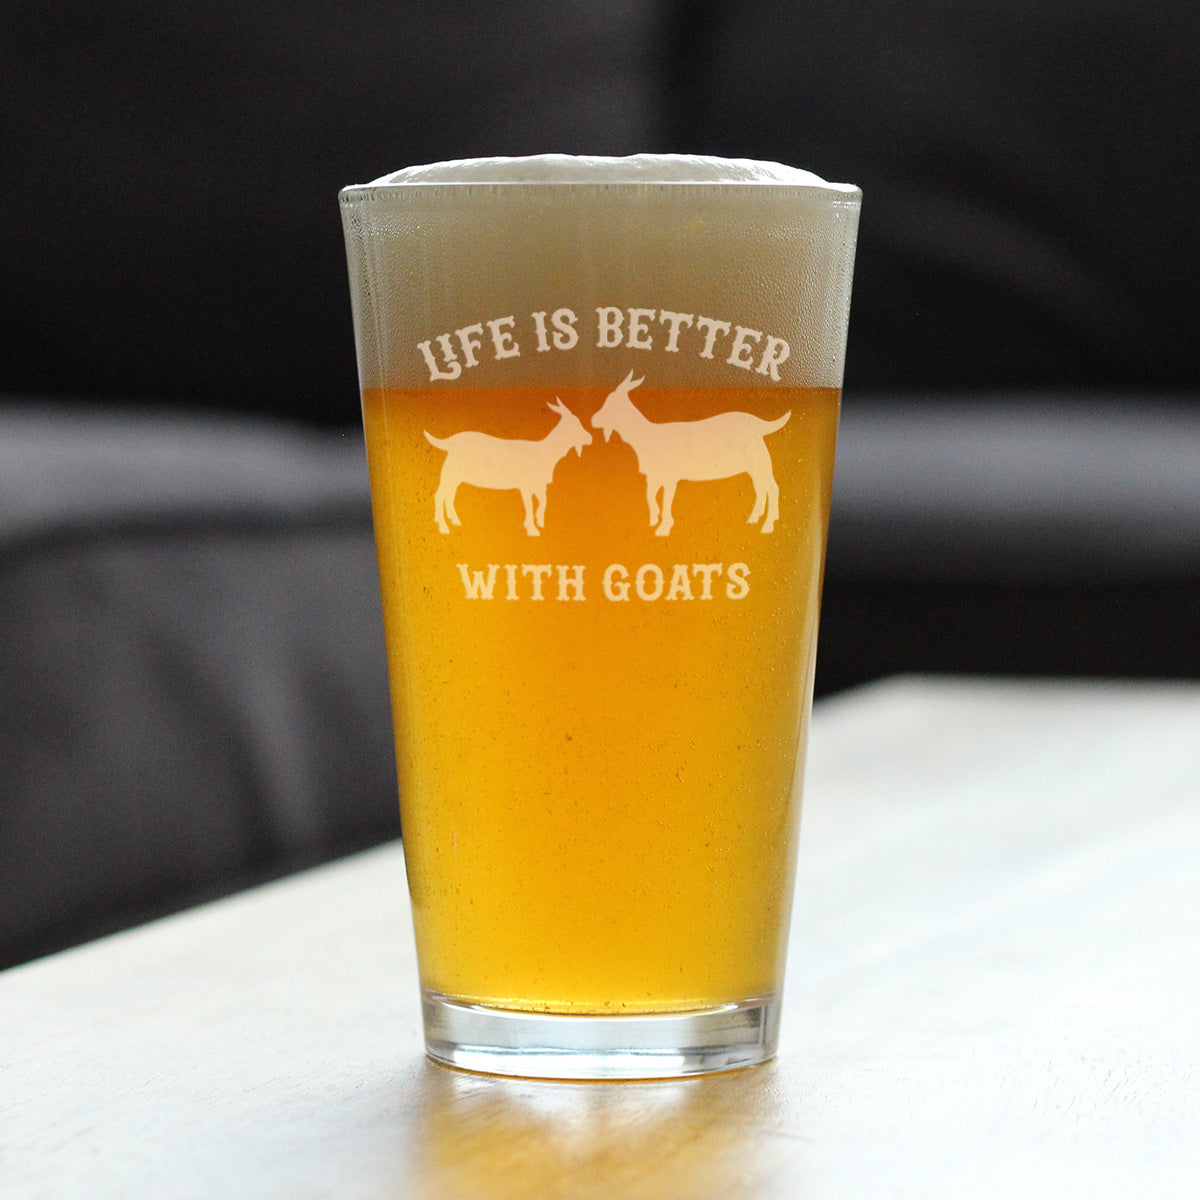 Life is Better With Goats - Goat Pint Glass for Beer - Unique Funny Farm Animal Themed Decor and Gifts - 16 Oz